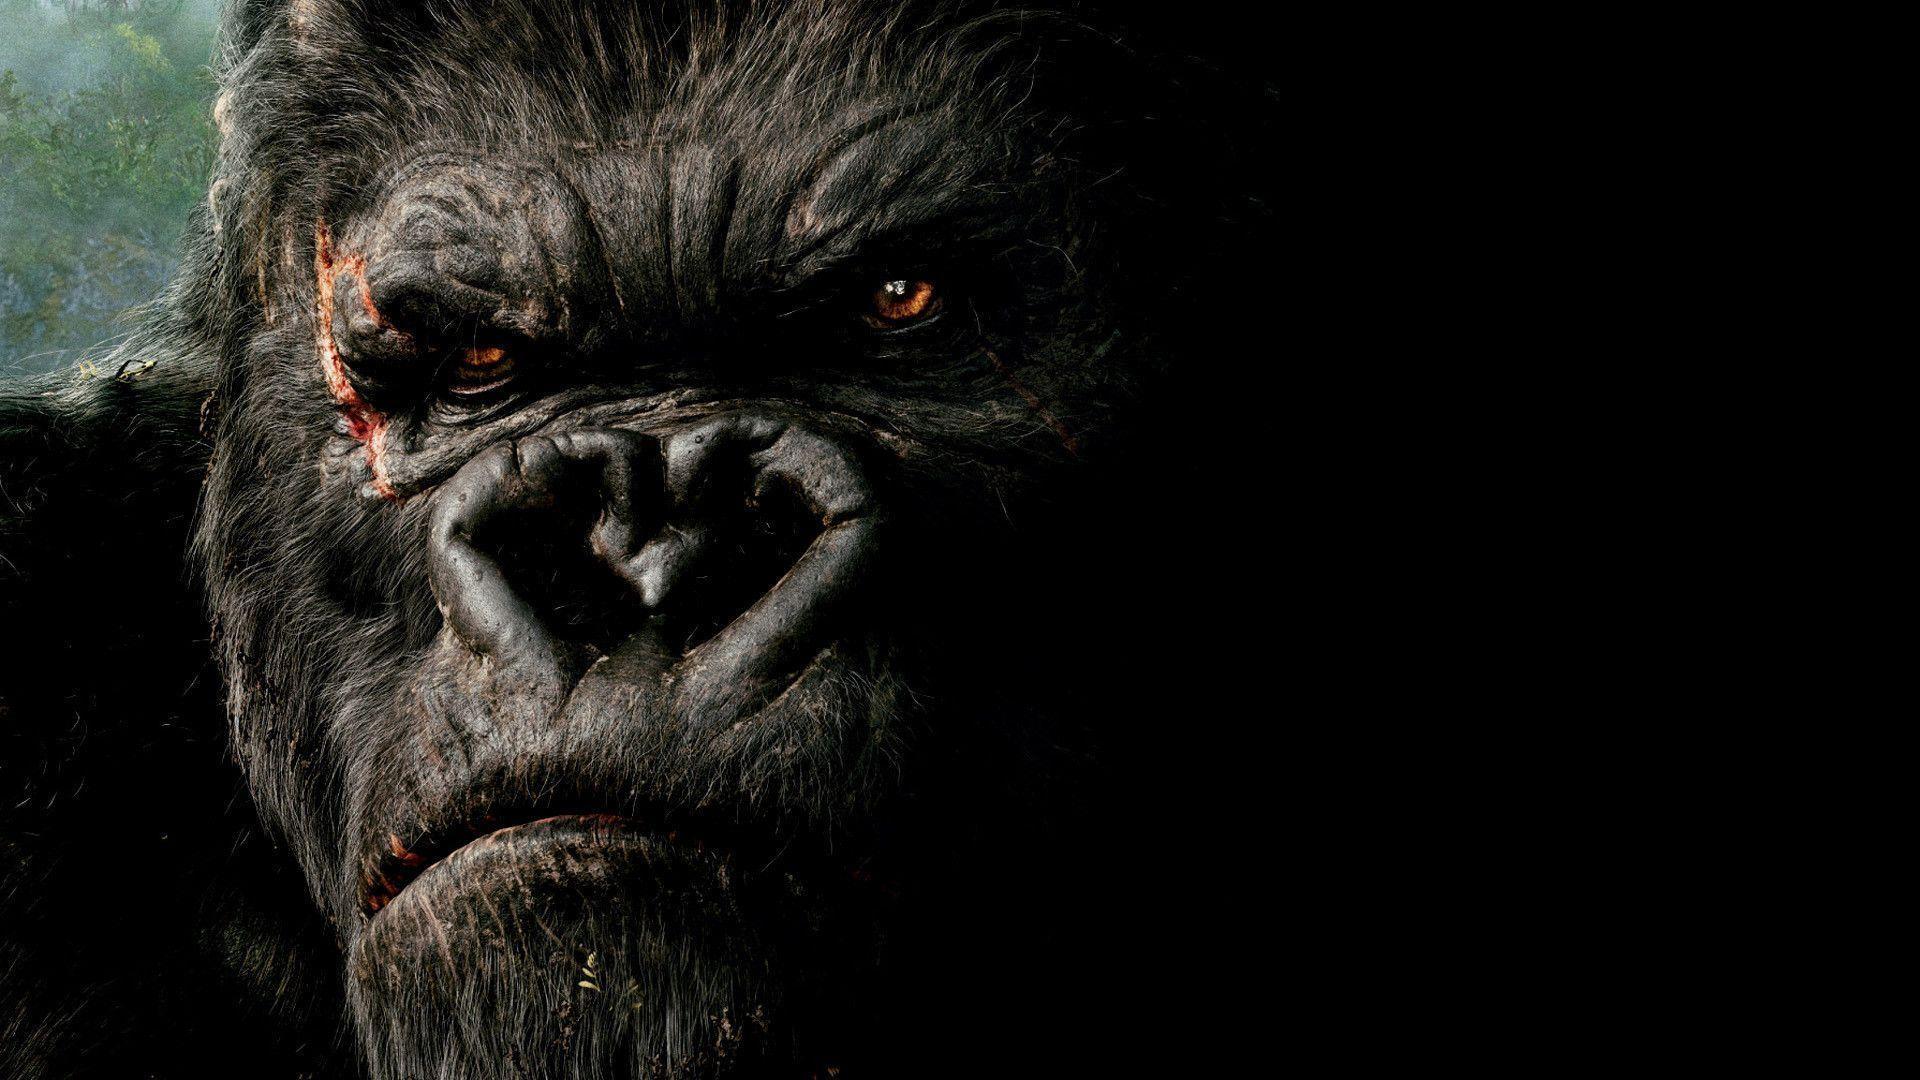 King Kong (2005) Movie in HD and Wallpaper